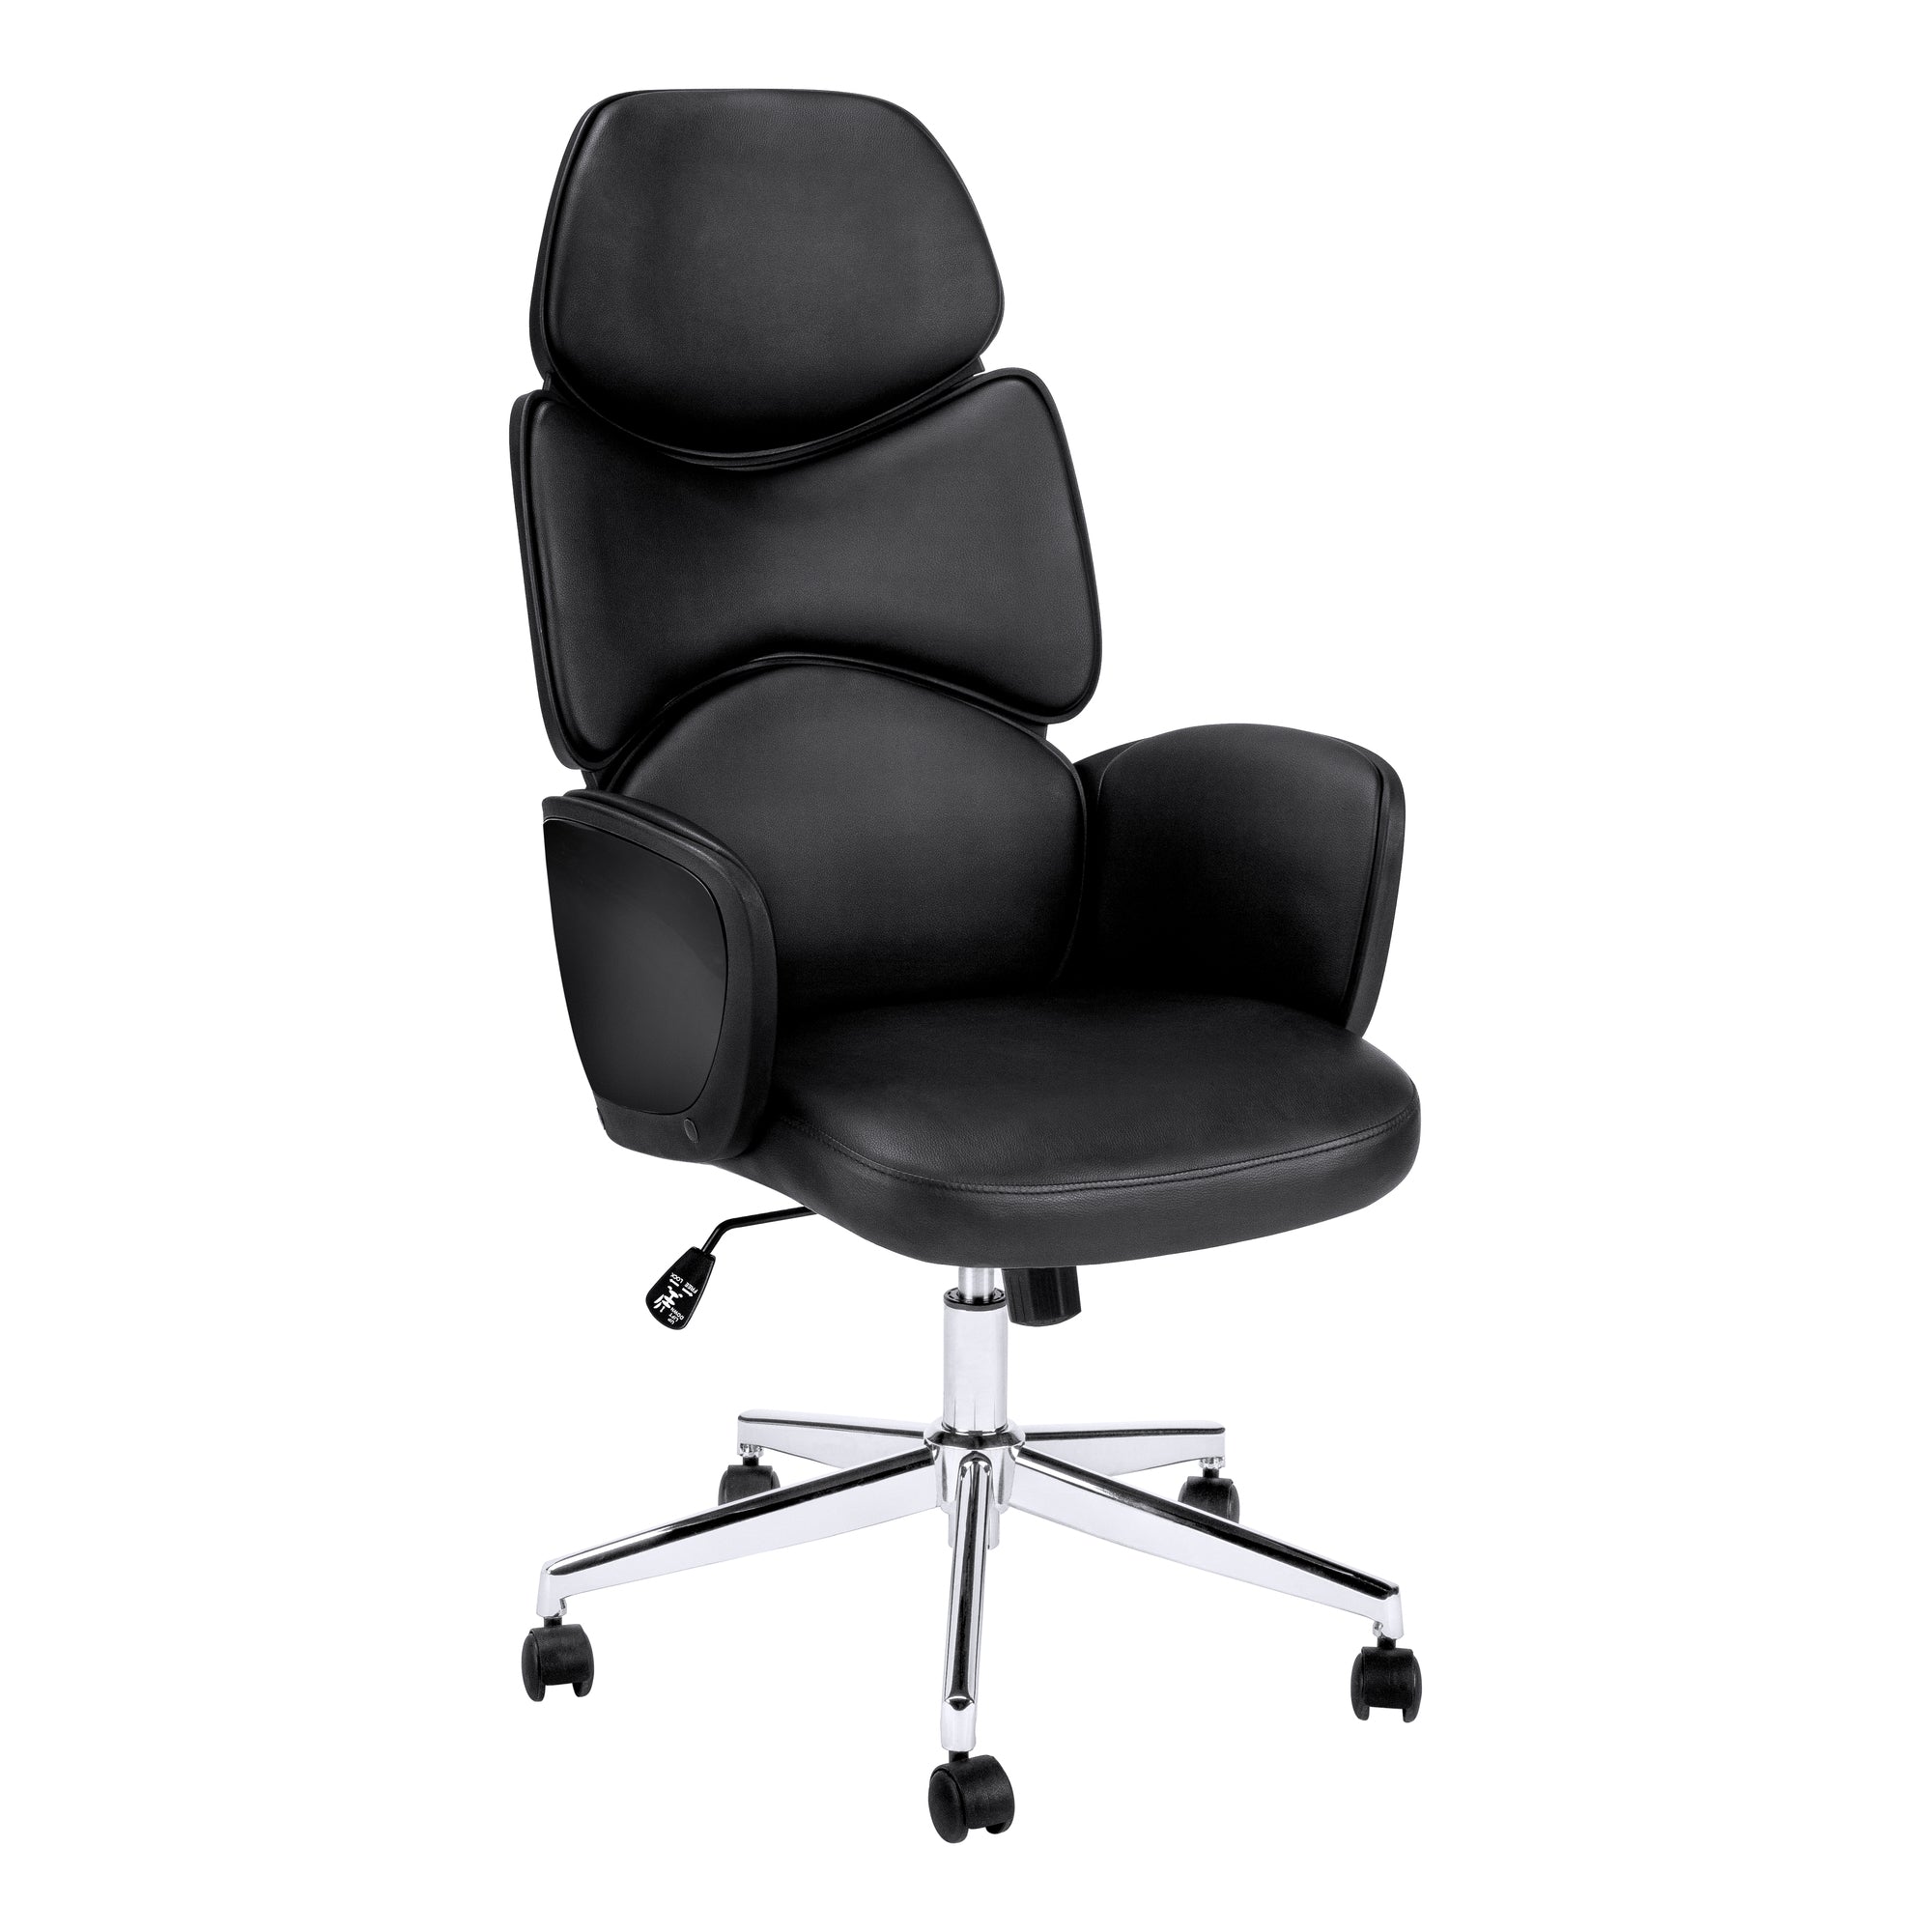 MN-217321    Office Chair, Adjustable Height, Swivel, Ergonomic, Armrests, Computer Desk, Office, Metal Base, Leather Look, Acrylic, Glossy Black, Chrome, Contemporary, Modern